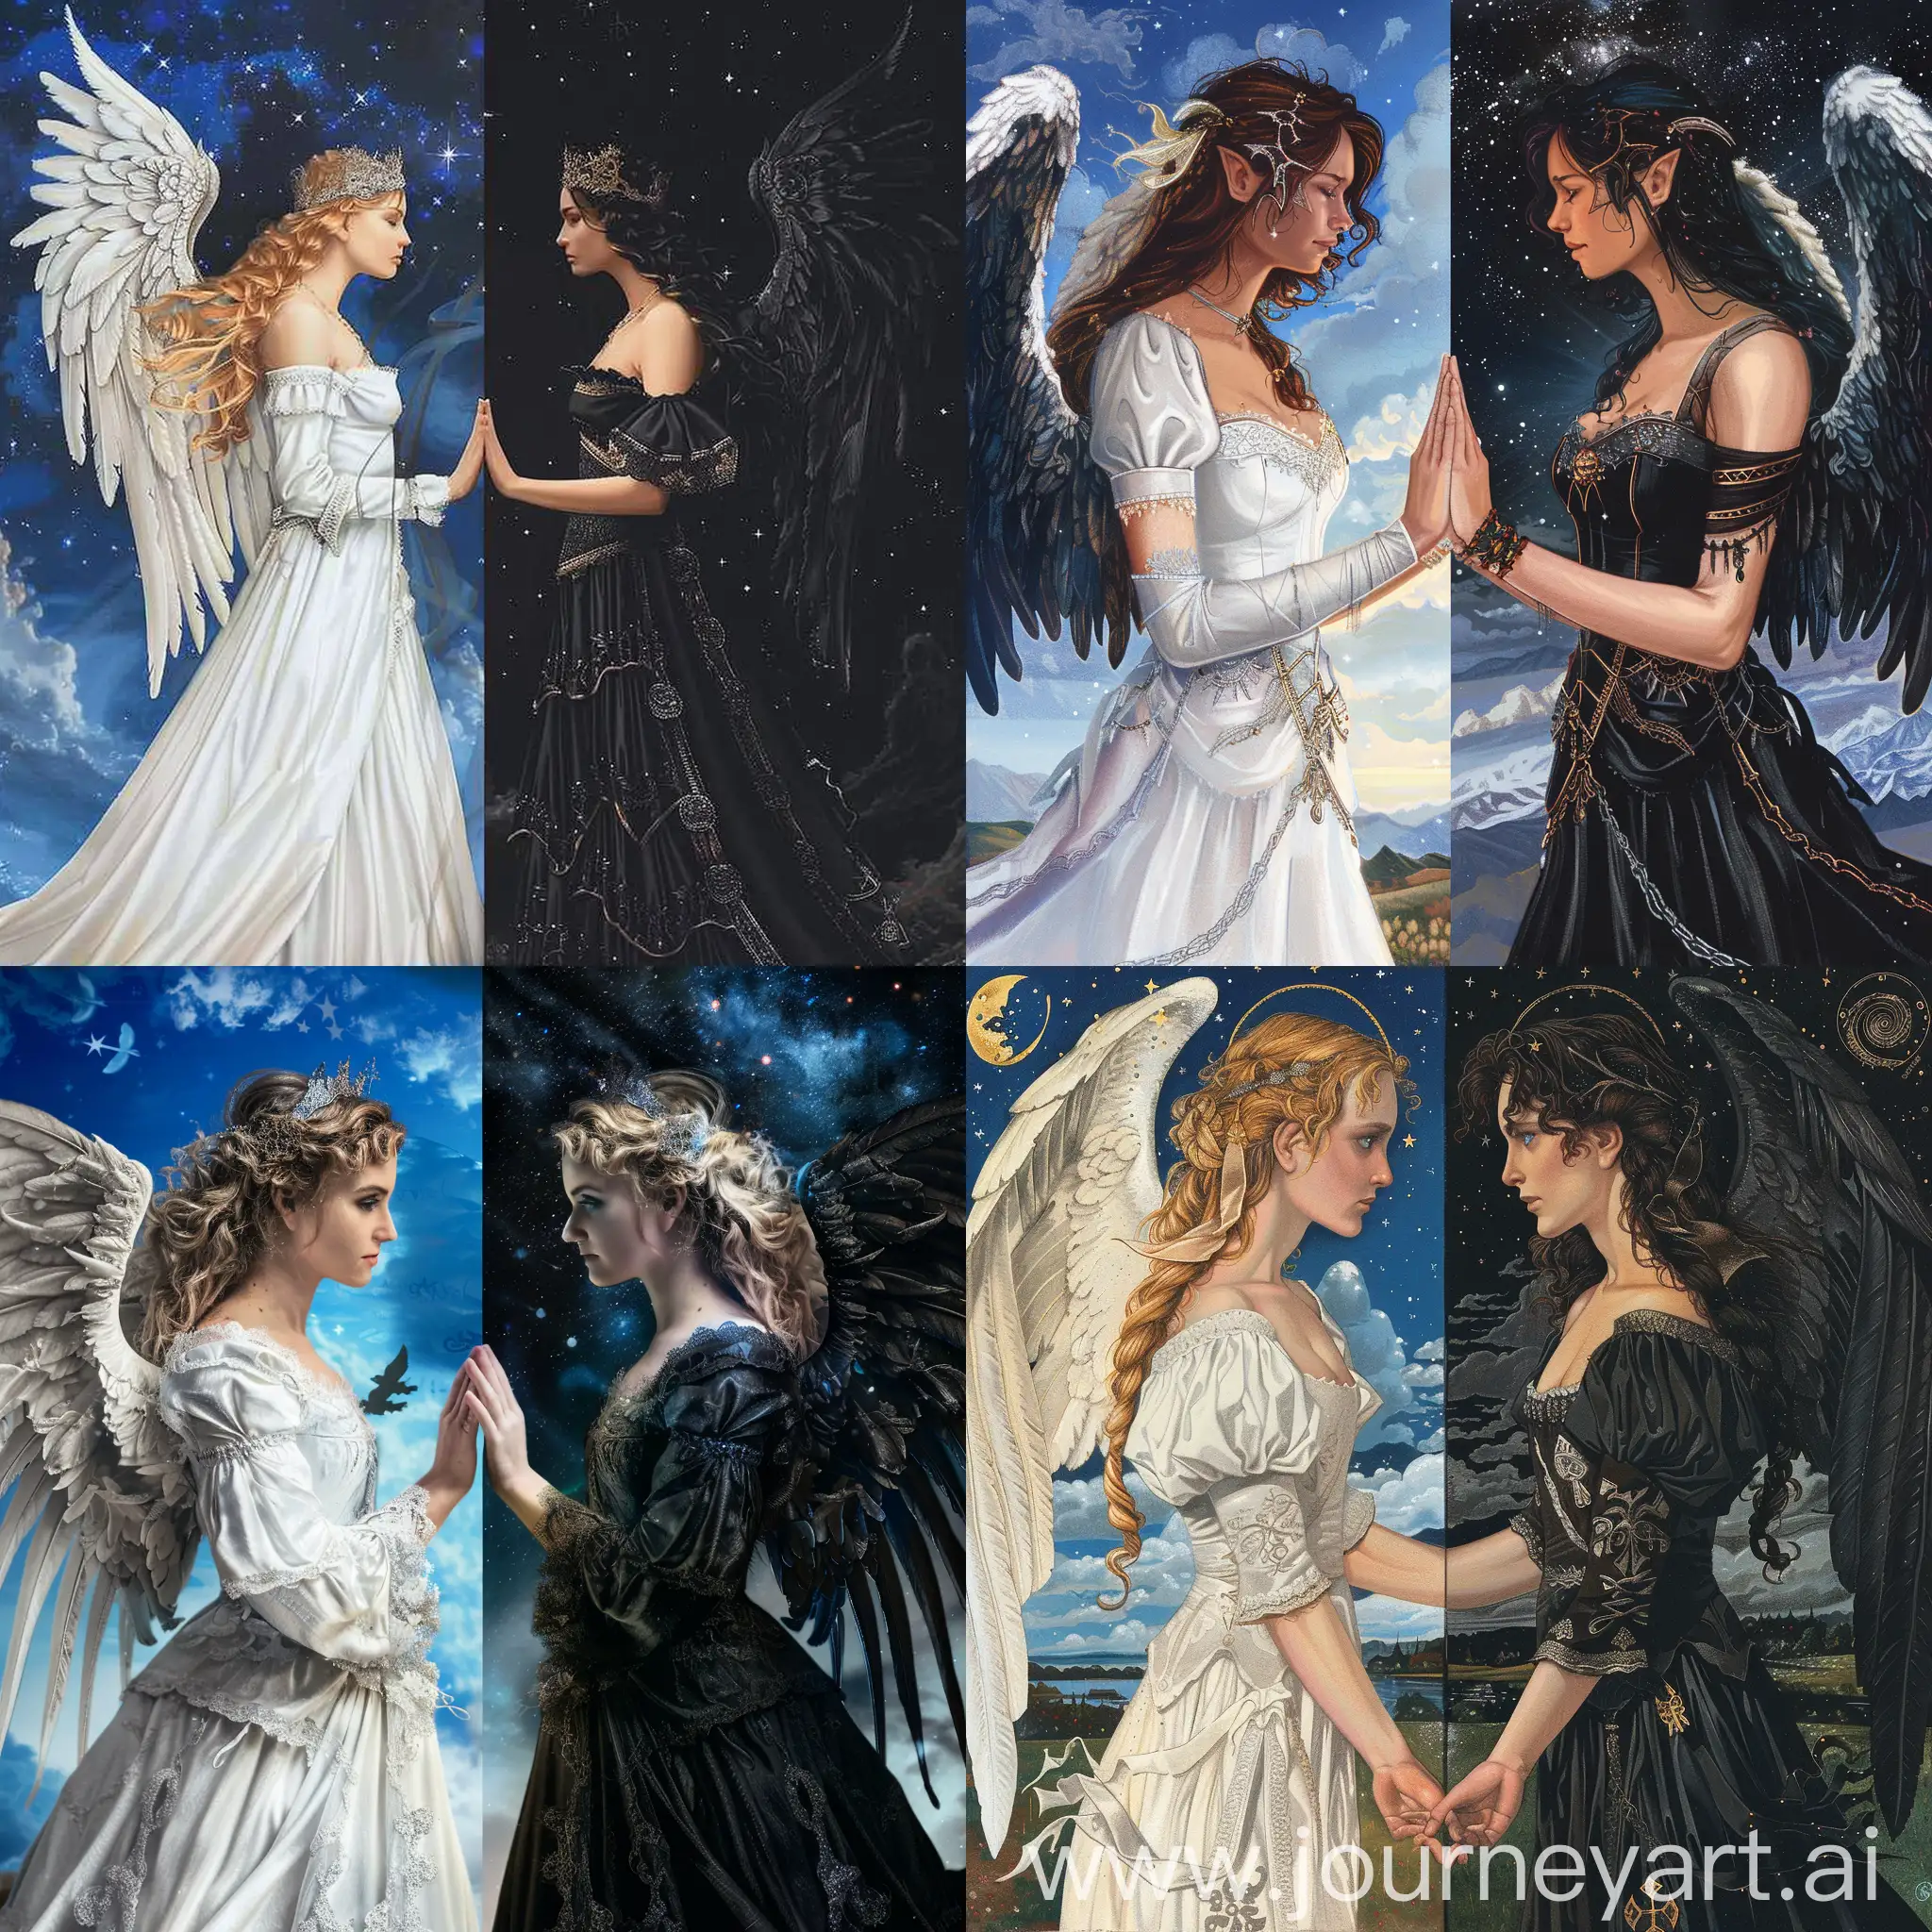 Image divided into two. Left side daytime with blue sky and right side nighttime with dark sky and stars. In the daytime side is a medieval angel in a white medieval dress and on the night time side is an angel in a black medieval dress and black wings. Their hands are touching in the middle 